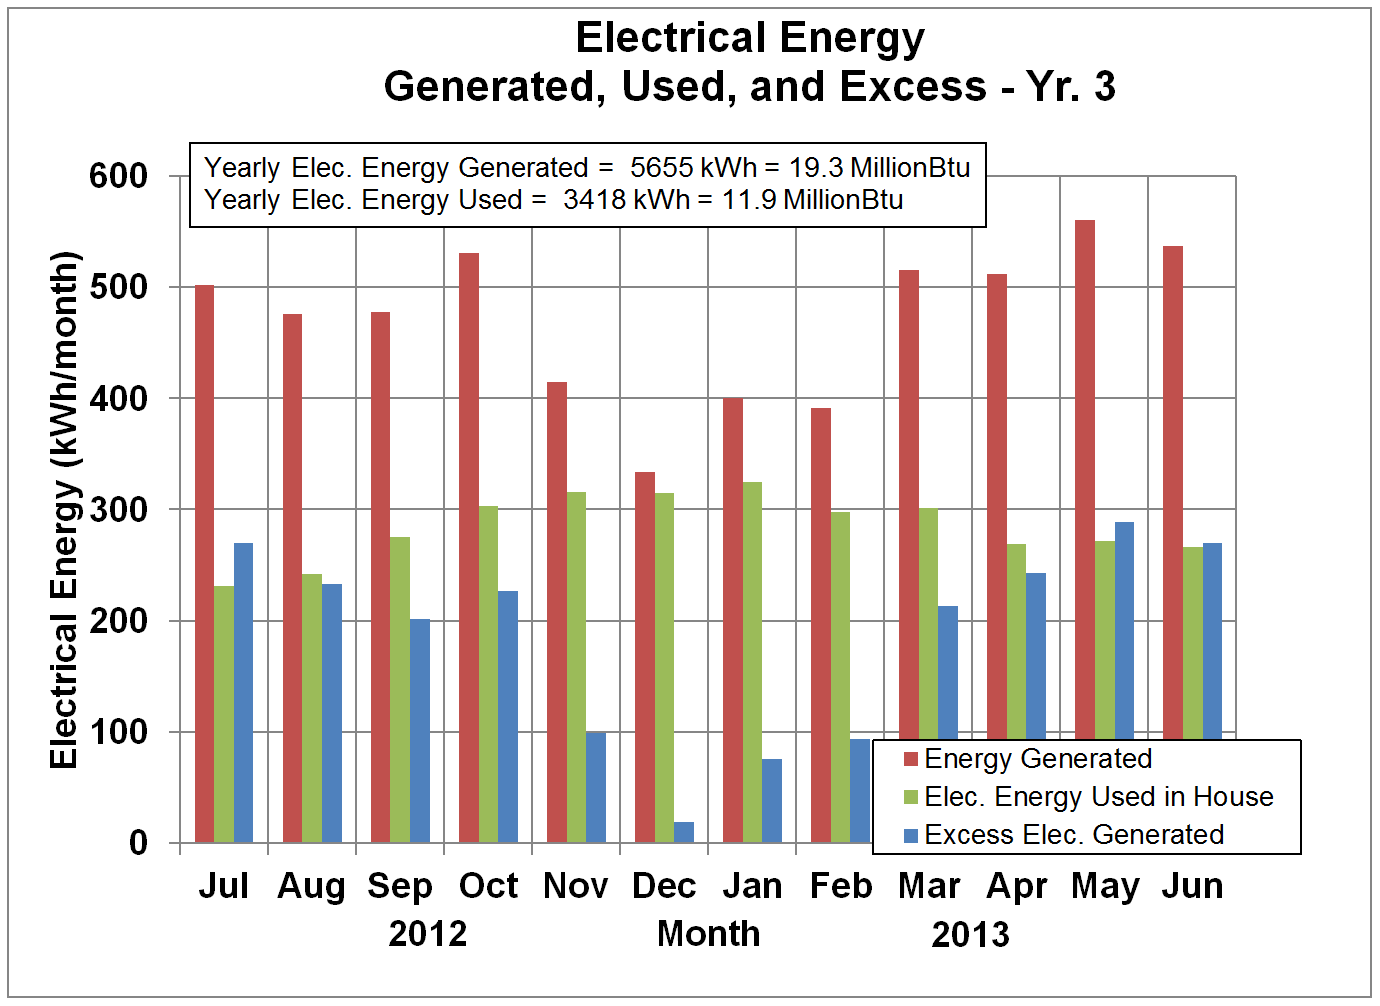 Electrical Energy Generated, Used, and Banked - Yr. 3